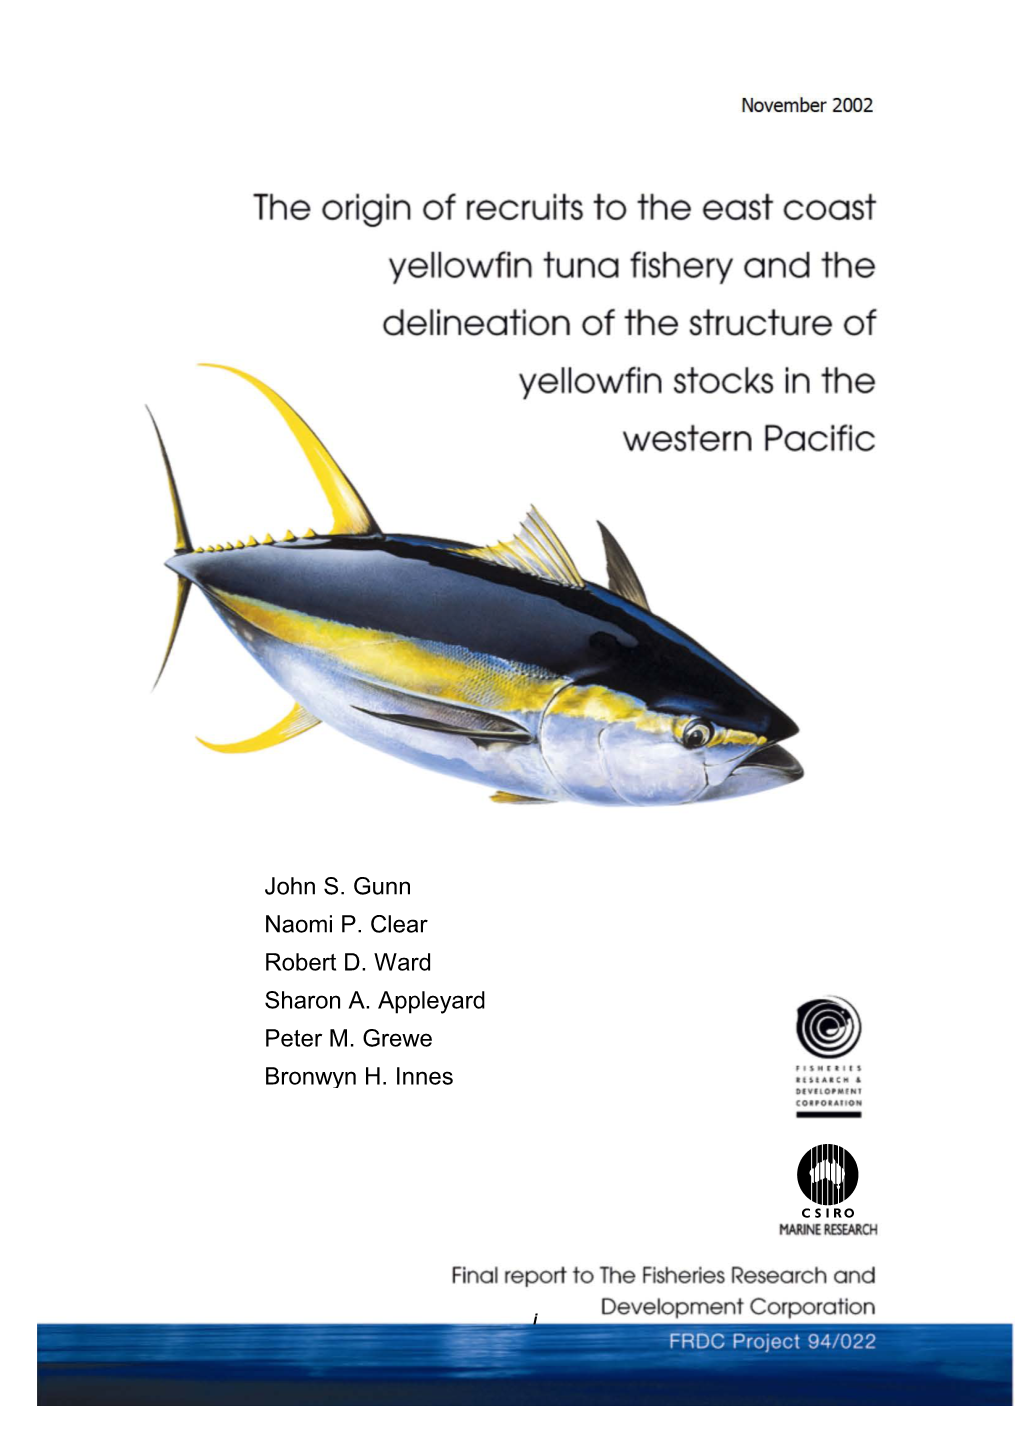 And Movements of Yellowfin Tuna (Orange); Larger, Darker Arrows Indicate More Common Movements of Yellowfin